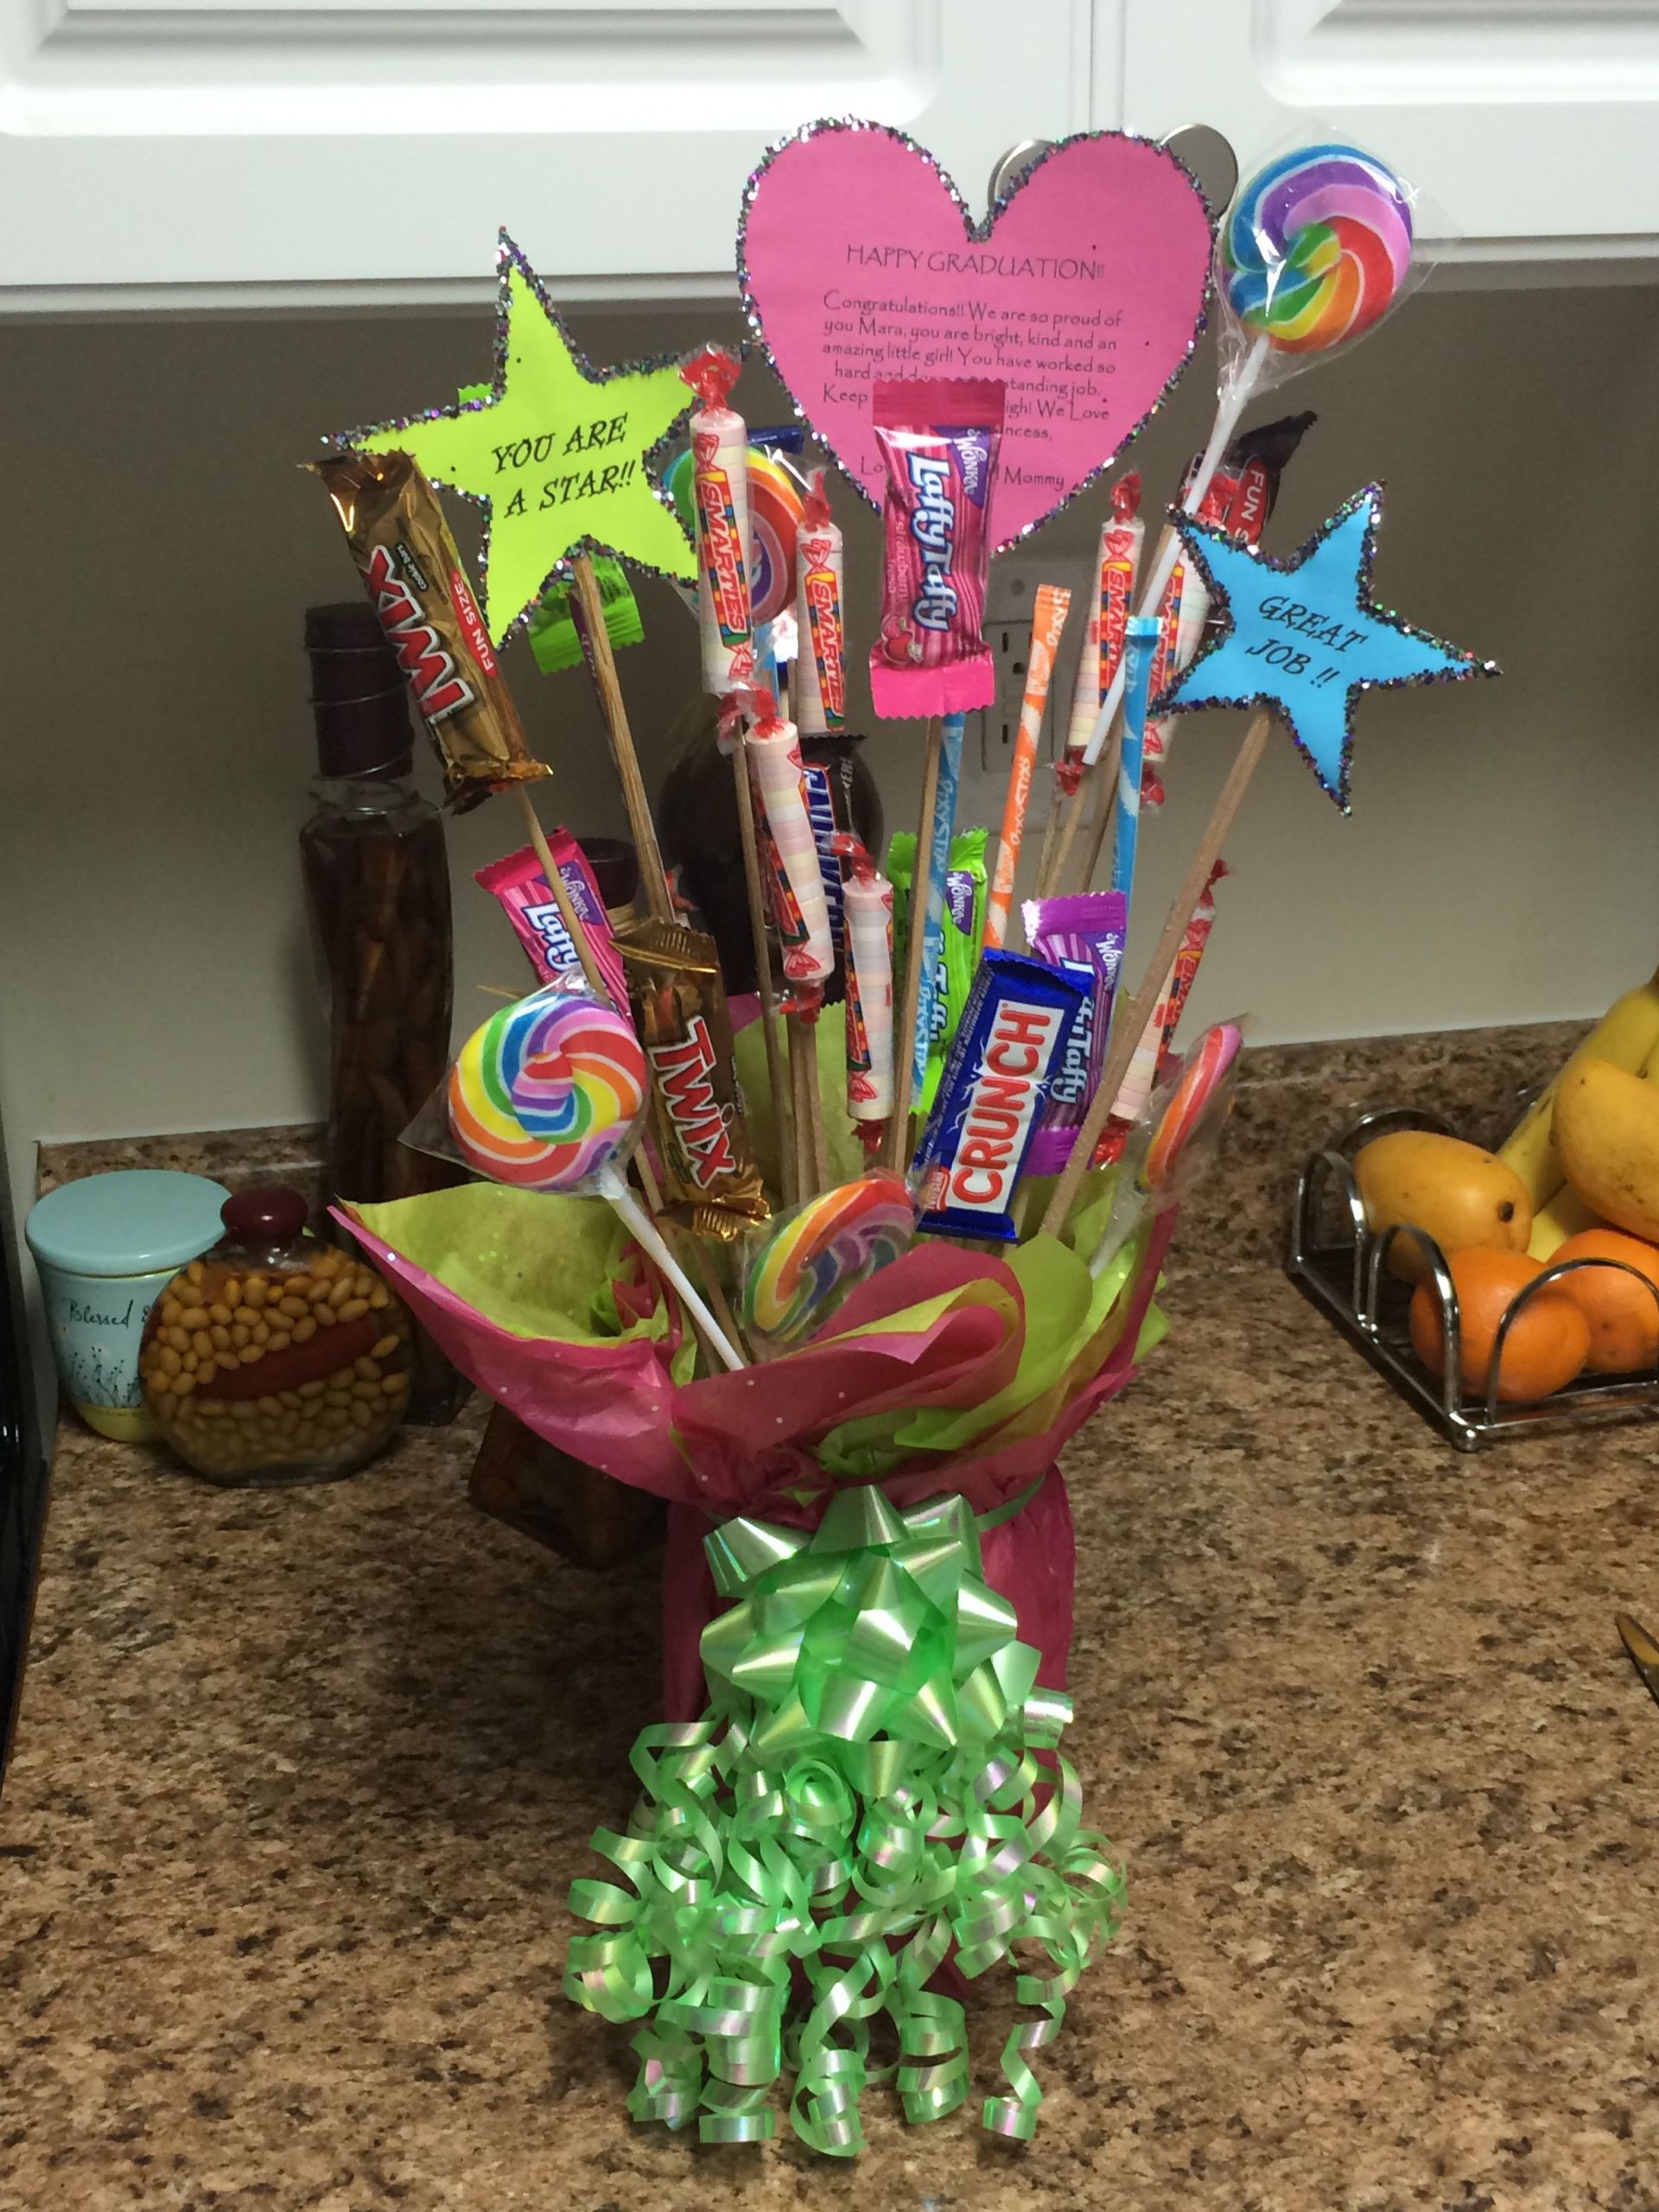 Fifth Grade Graduation Gift Ideas
 This is a t bouquet I made for my daughter s 5th grade